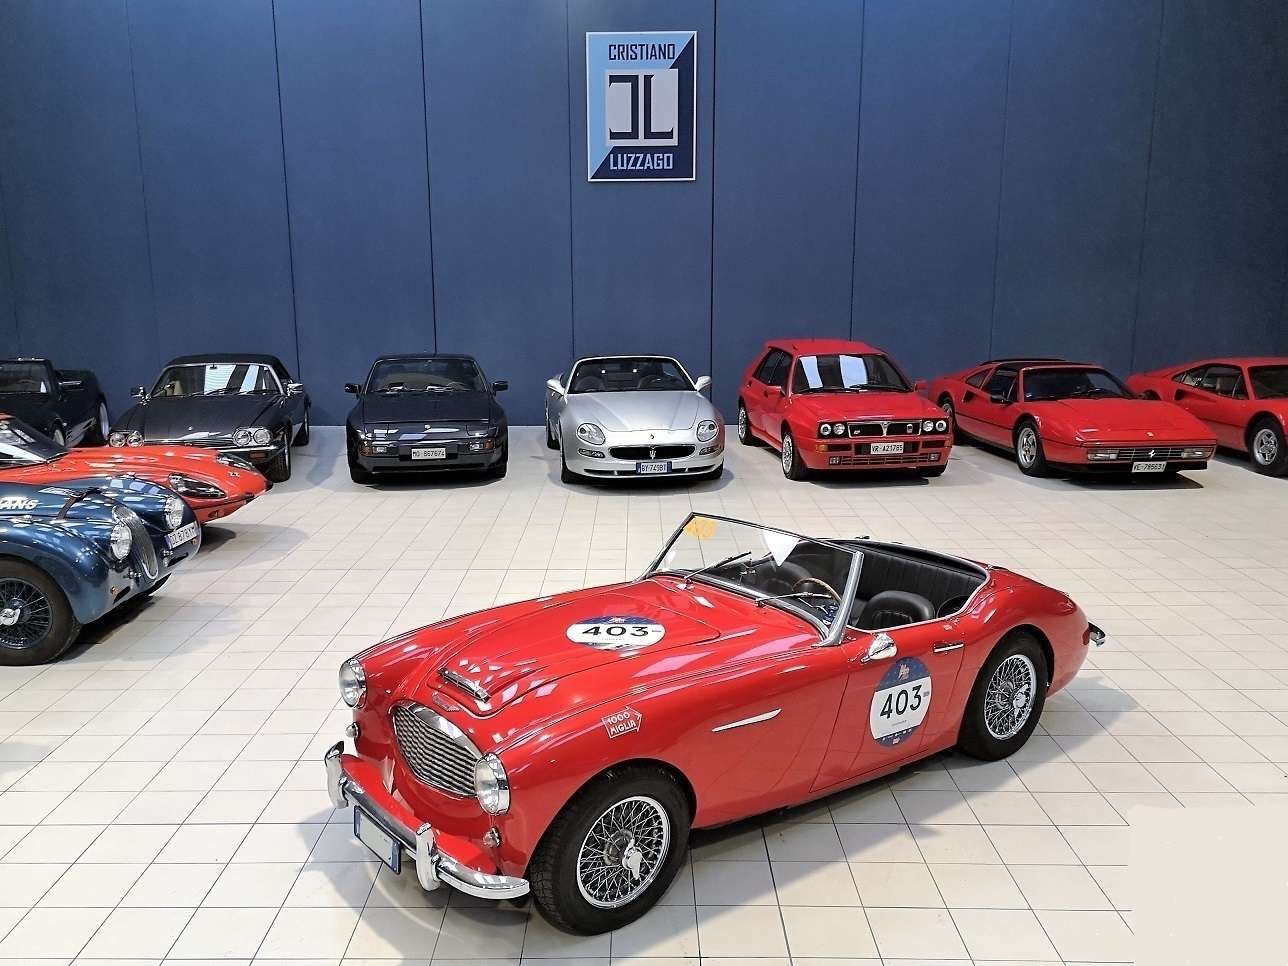 Austin-Healey 100 Convertible in Red antique / classic in Roncadelle - Brescia - BS for € 49,800.-